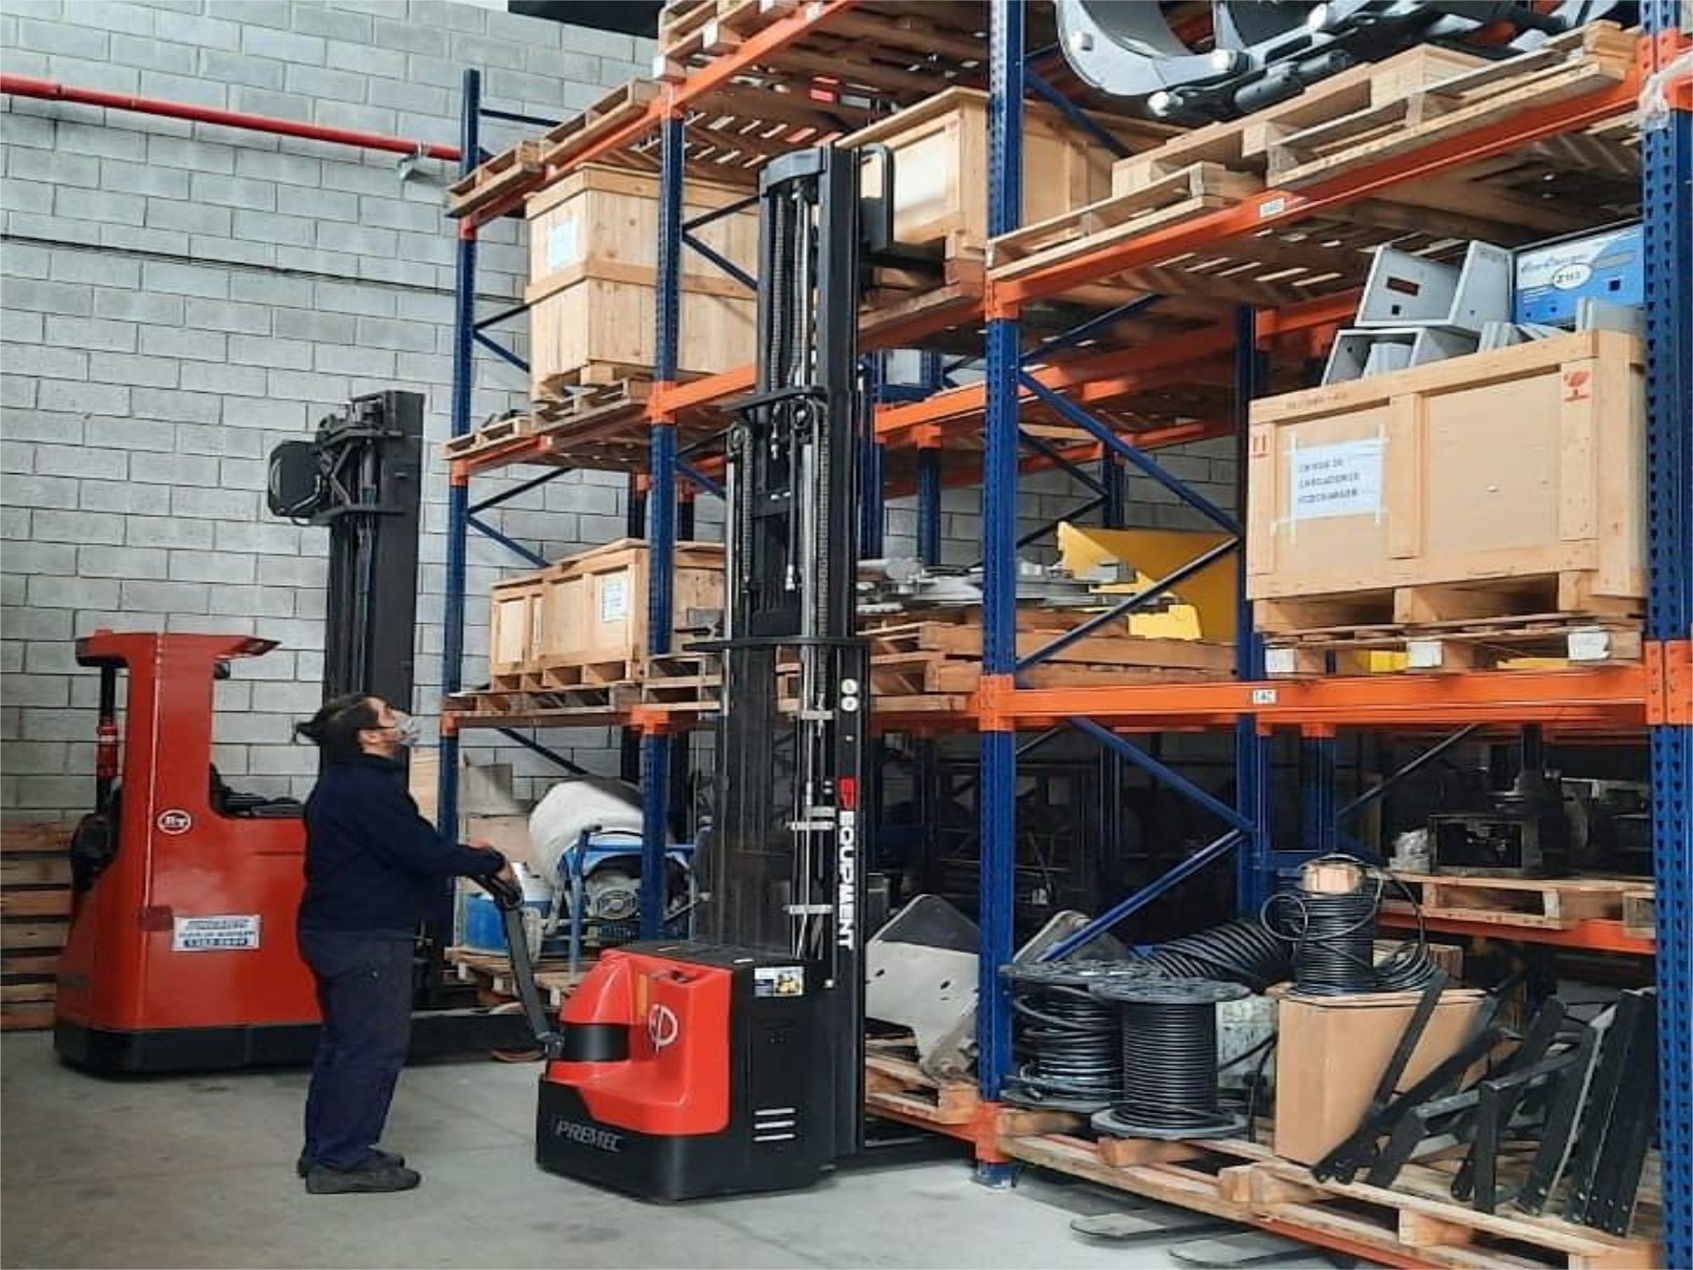 ES-WA SERIES electric pallet stacker being used in a warehouse to stack goods at a high level.